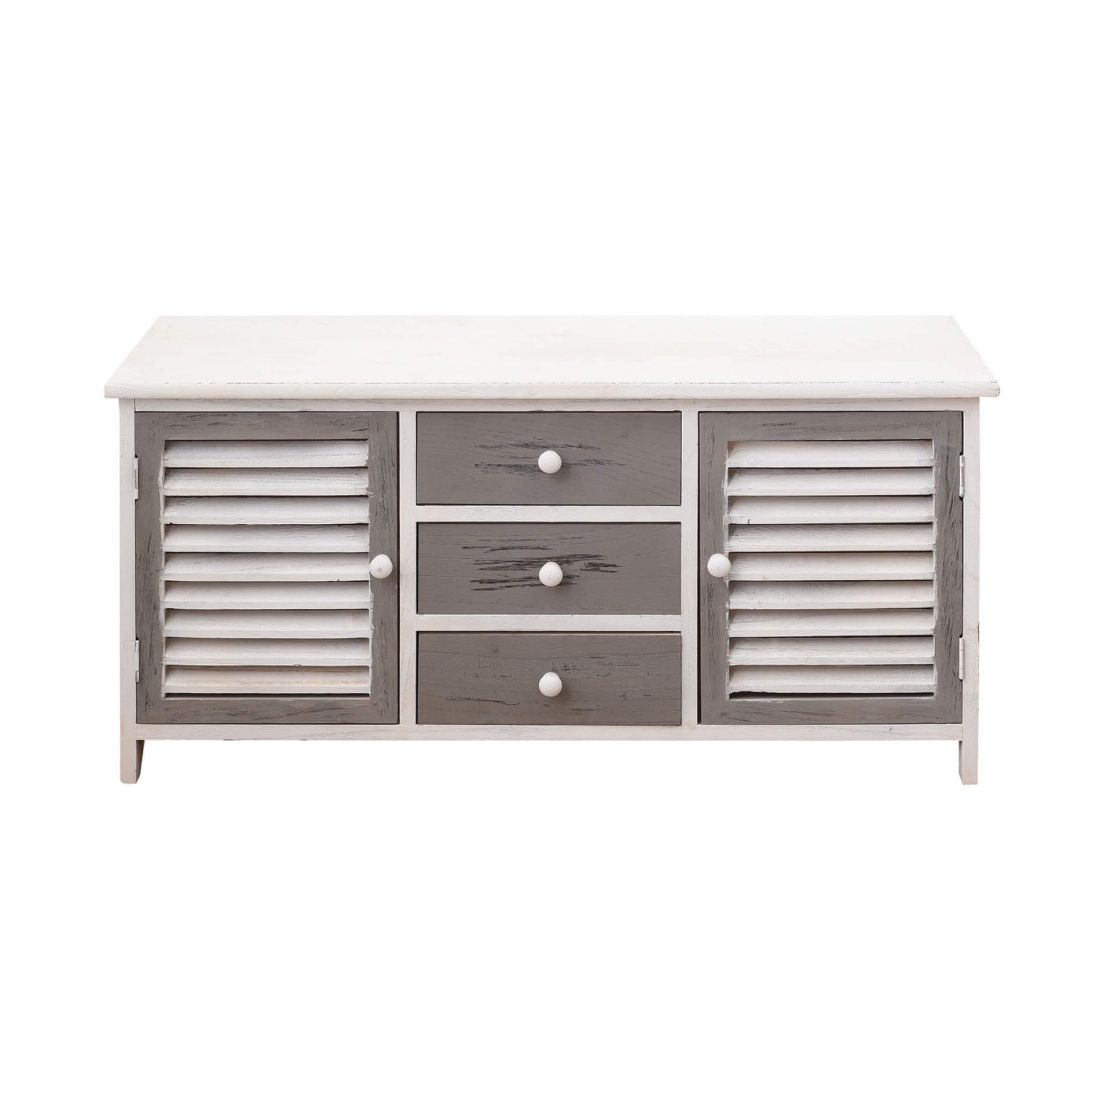 Low Sideboard In White And Gray Vintage Style – Mobili Rebecca With Regard To Gray Wooden Sideboards (View 11 of 20)